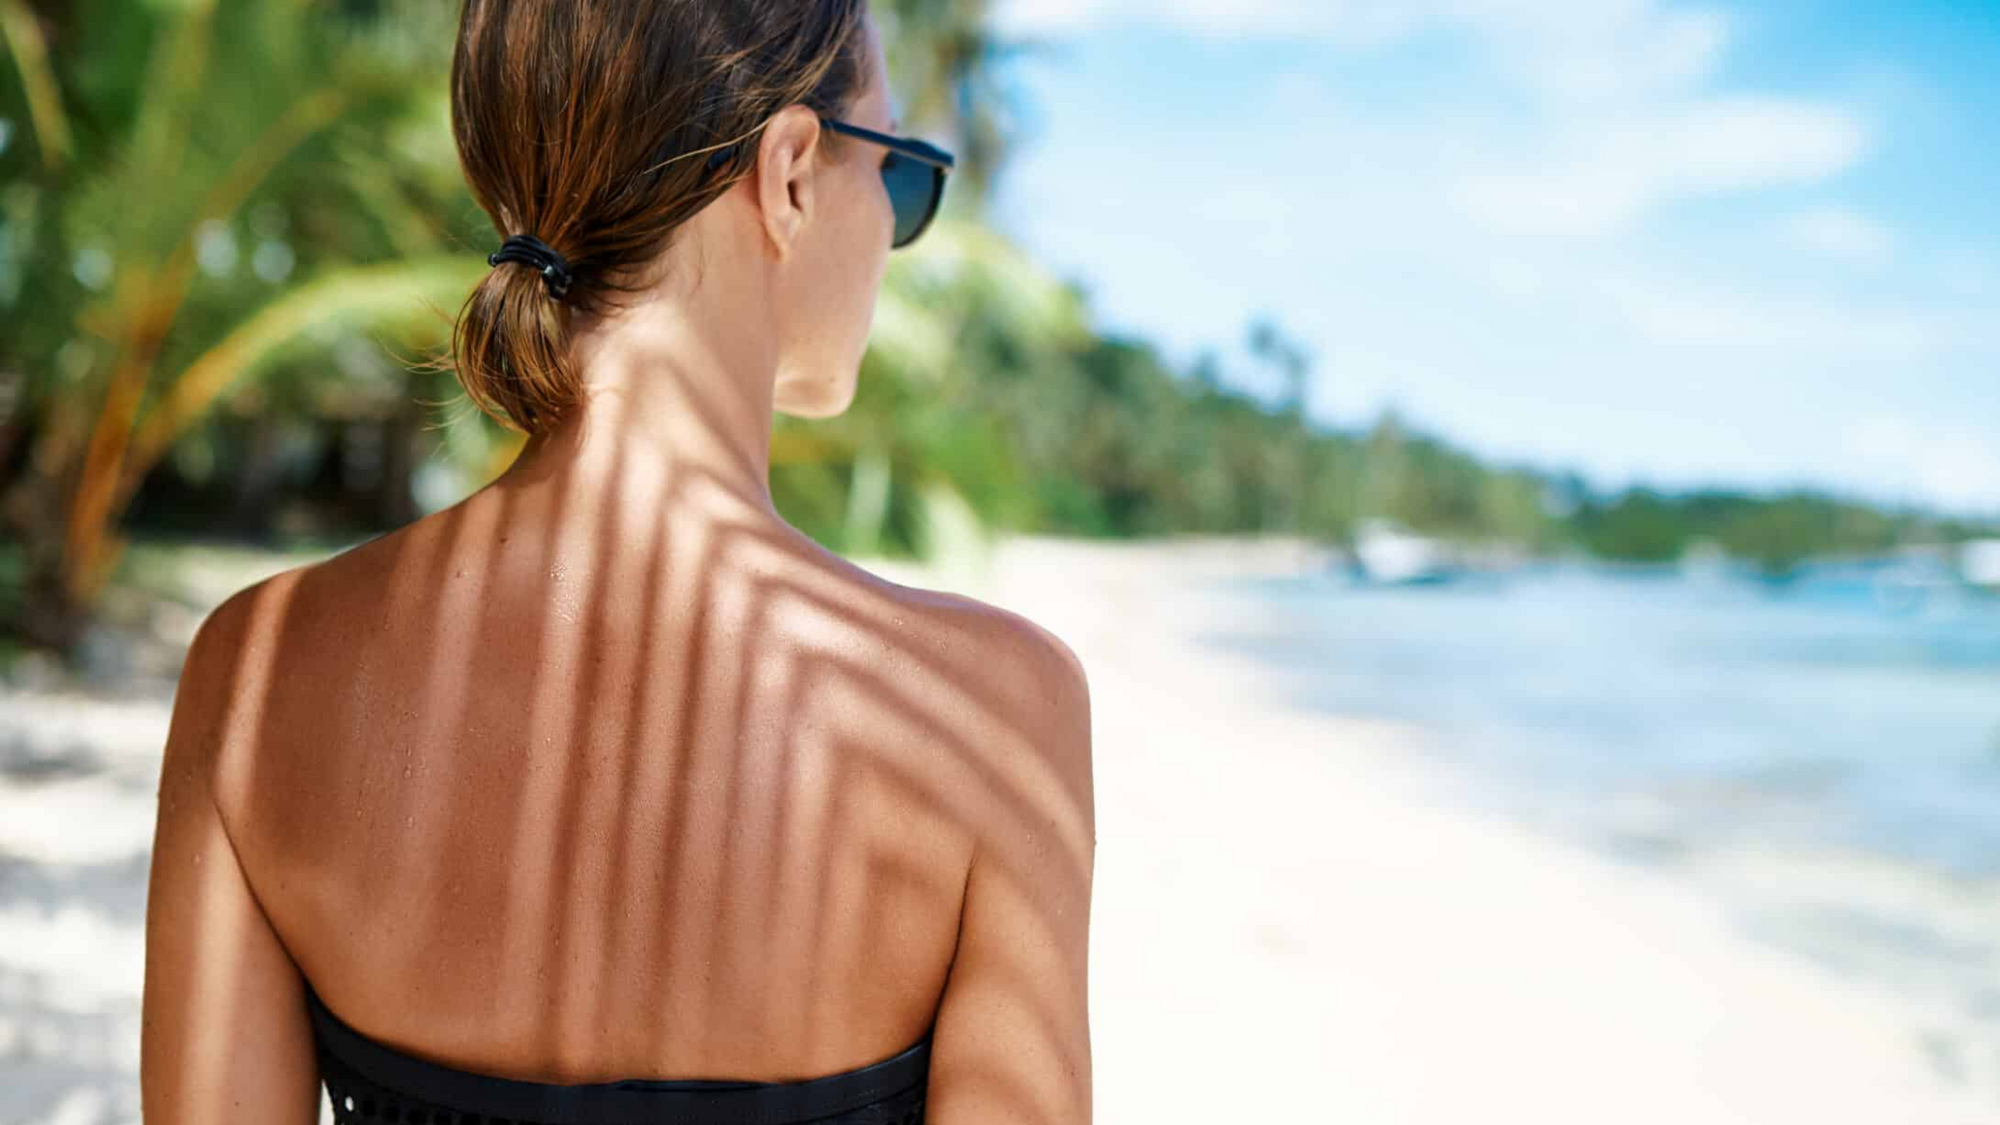 If skin cancer and melanoma is so serious why do so many people expose their skin to the sun?